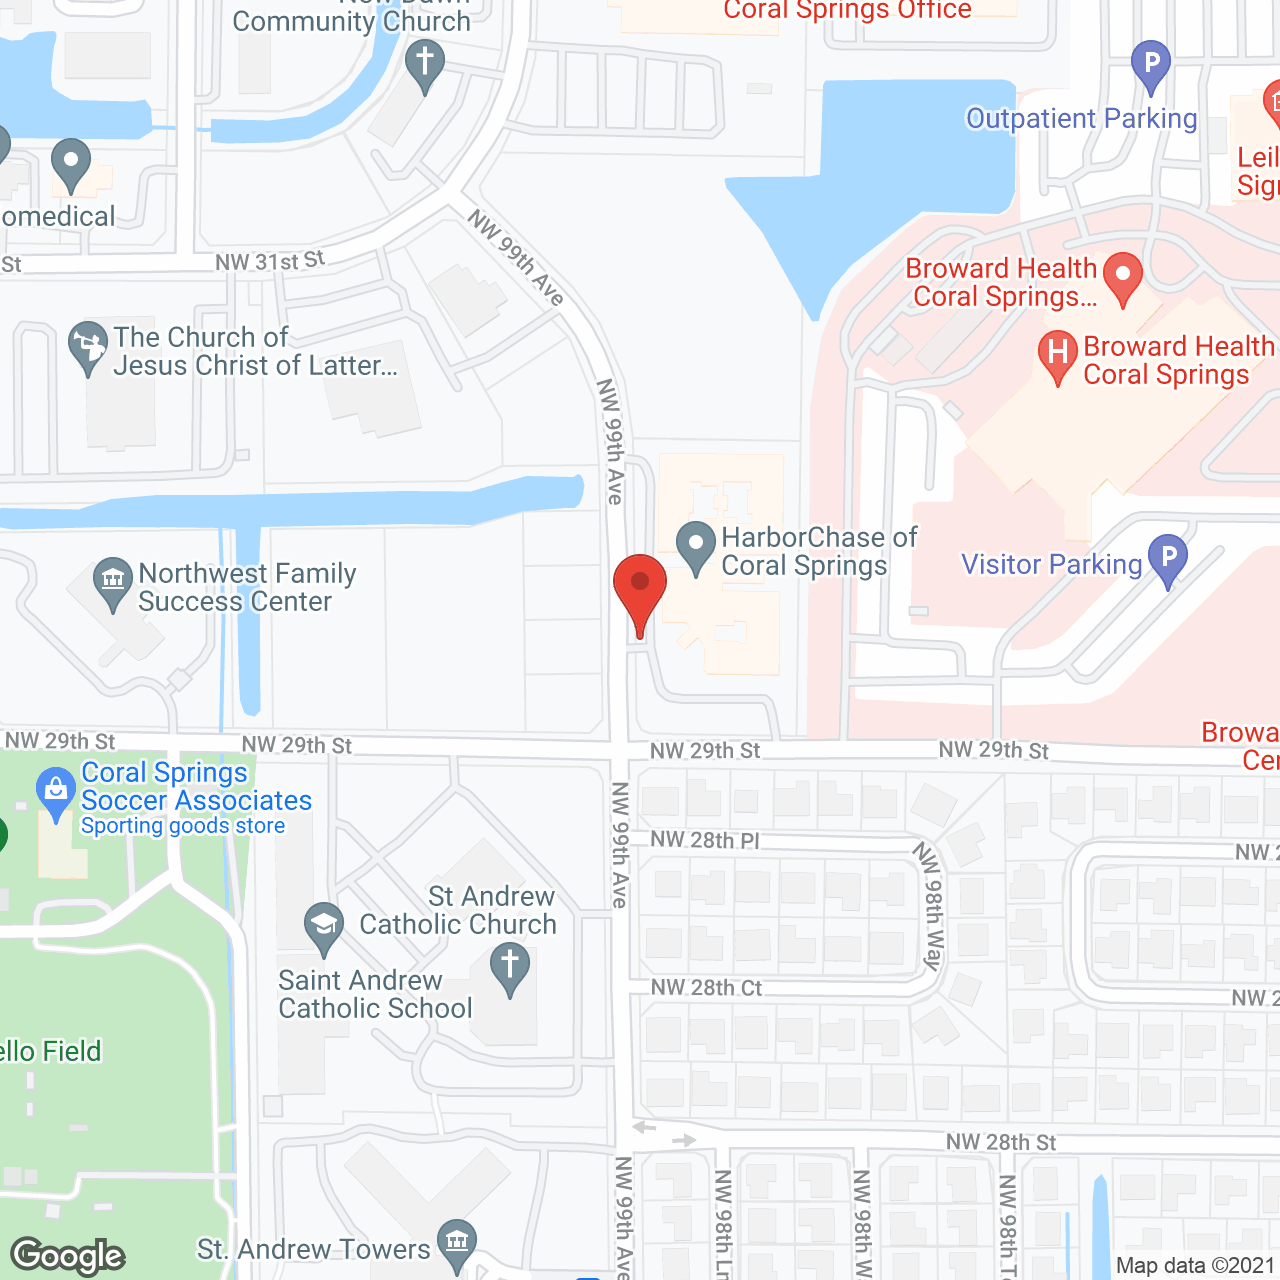 HarborChase of Coral Springs in google map